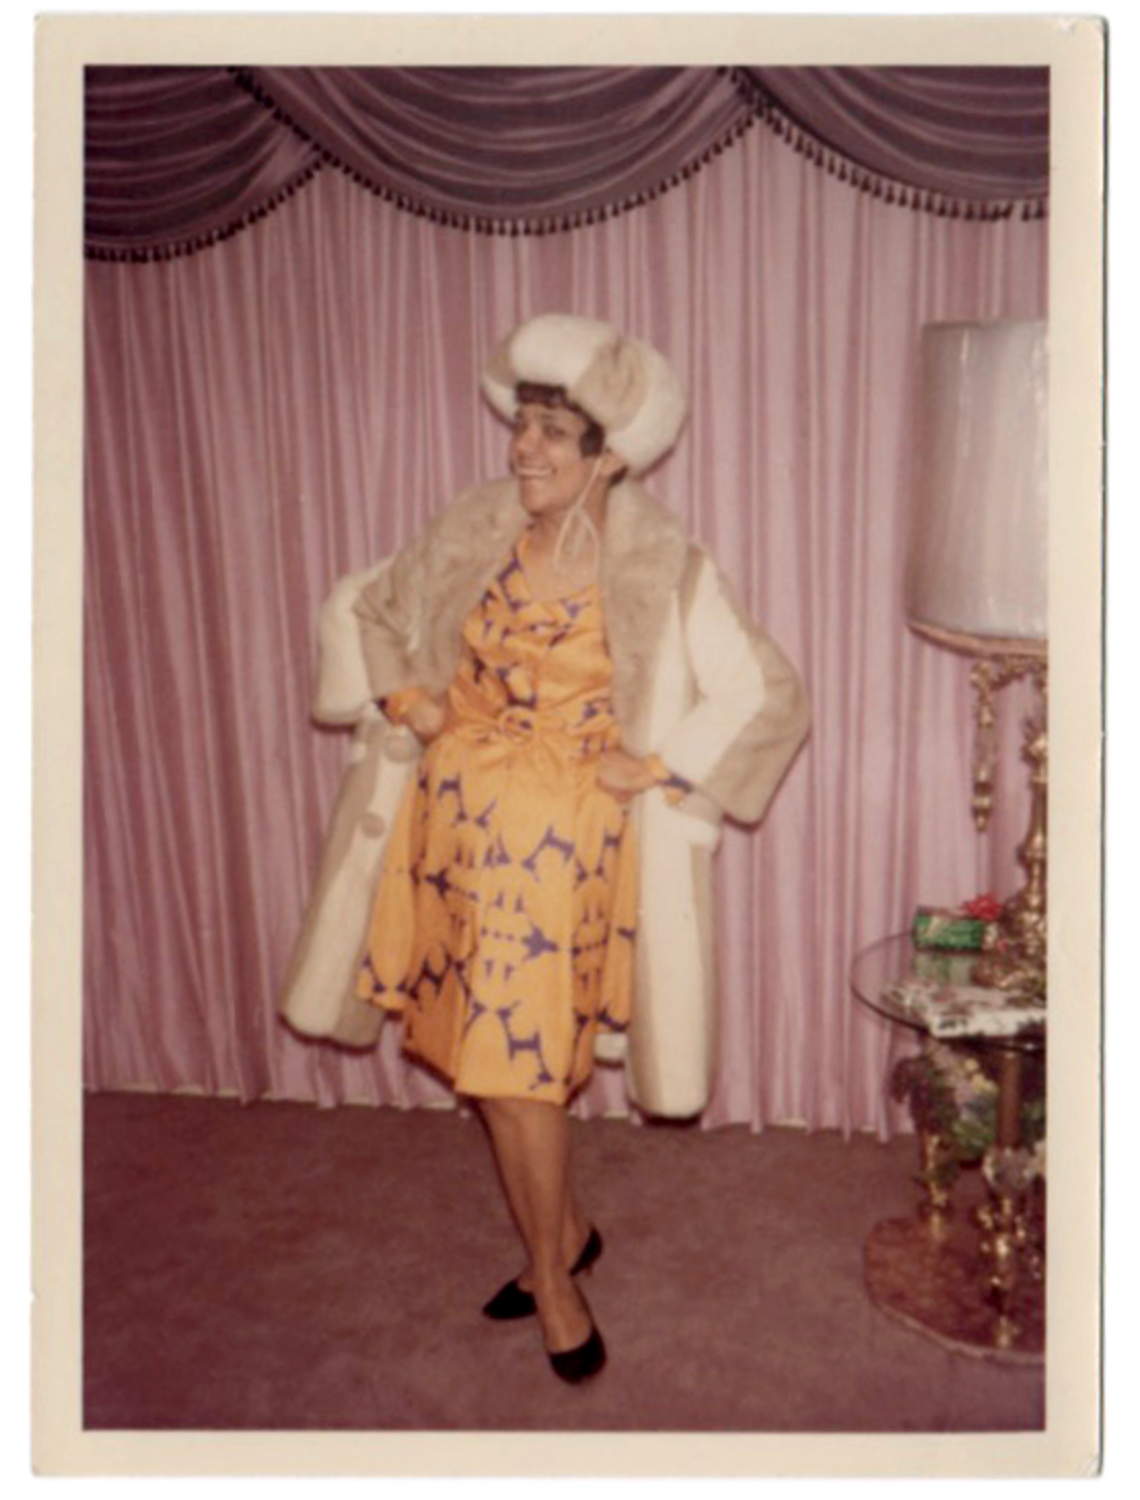 Dollree Mapp at home in an undated photograph. COURTESY OF THE MAPP FAMILY